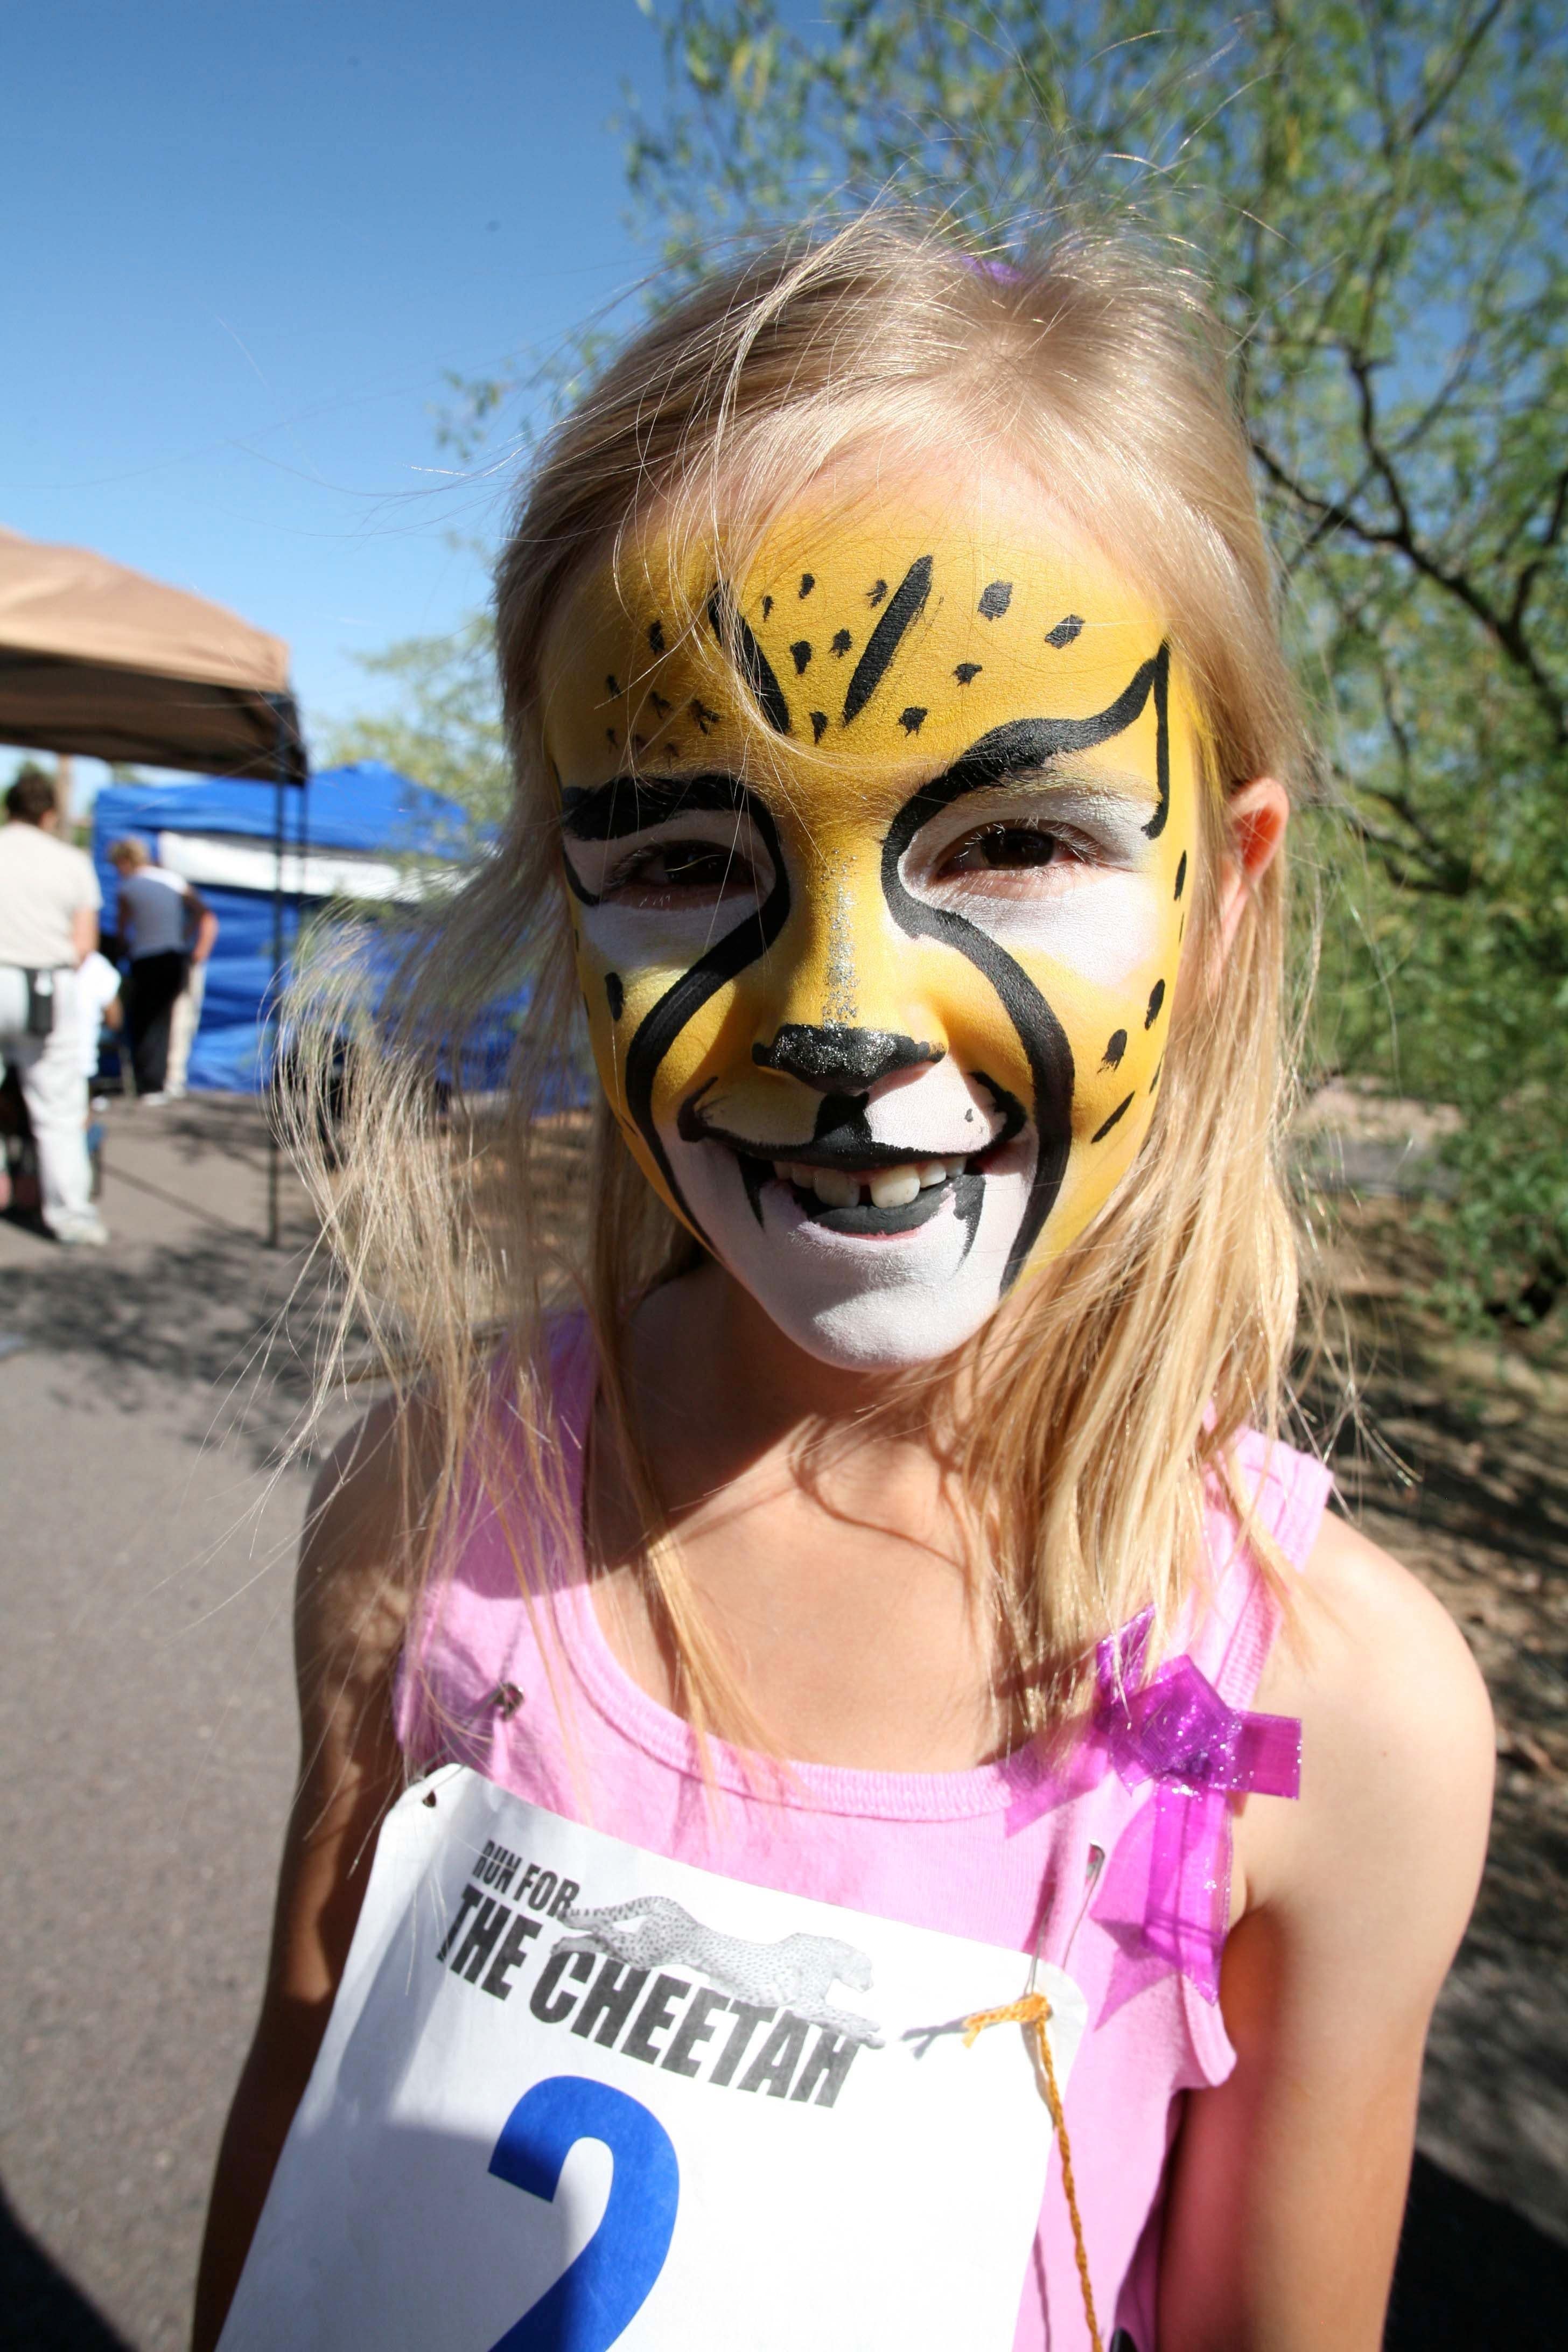 Paint a beautiful cheetah face and be a cheetah! Kid activity for parties, races and errand running.